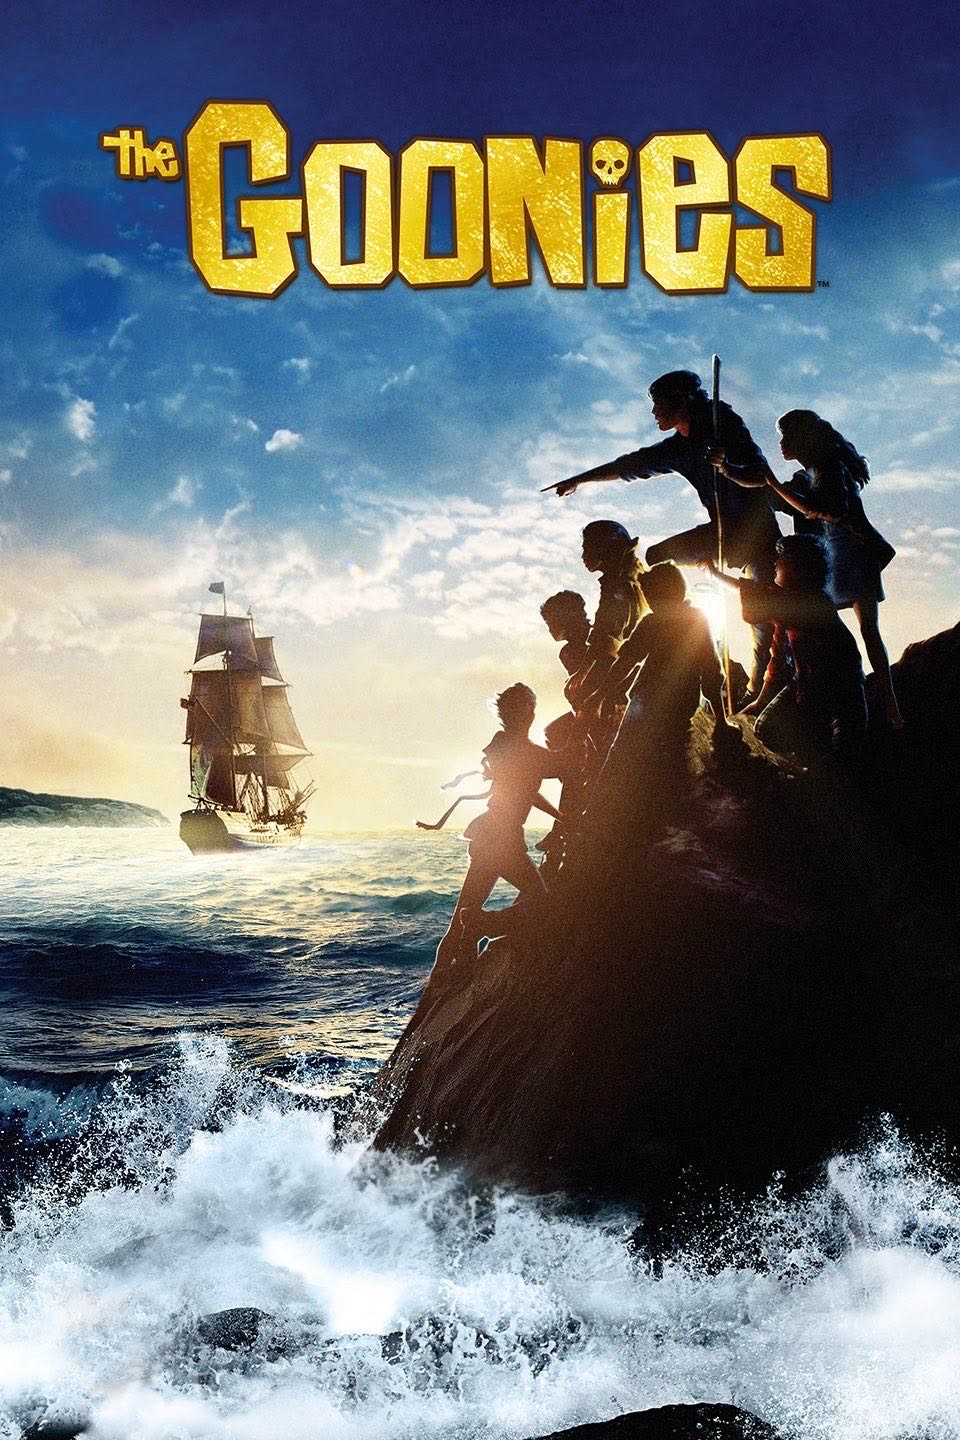 The Goonies (steelbook) Blu-ray movie collectible [Barcode 7321970115277] - Main Image 3